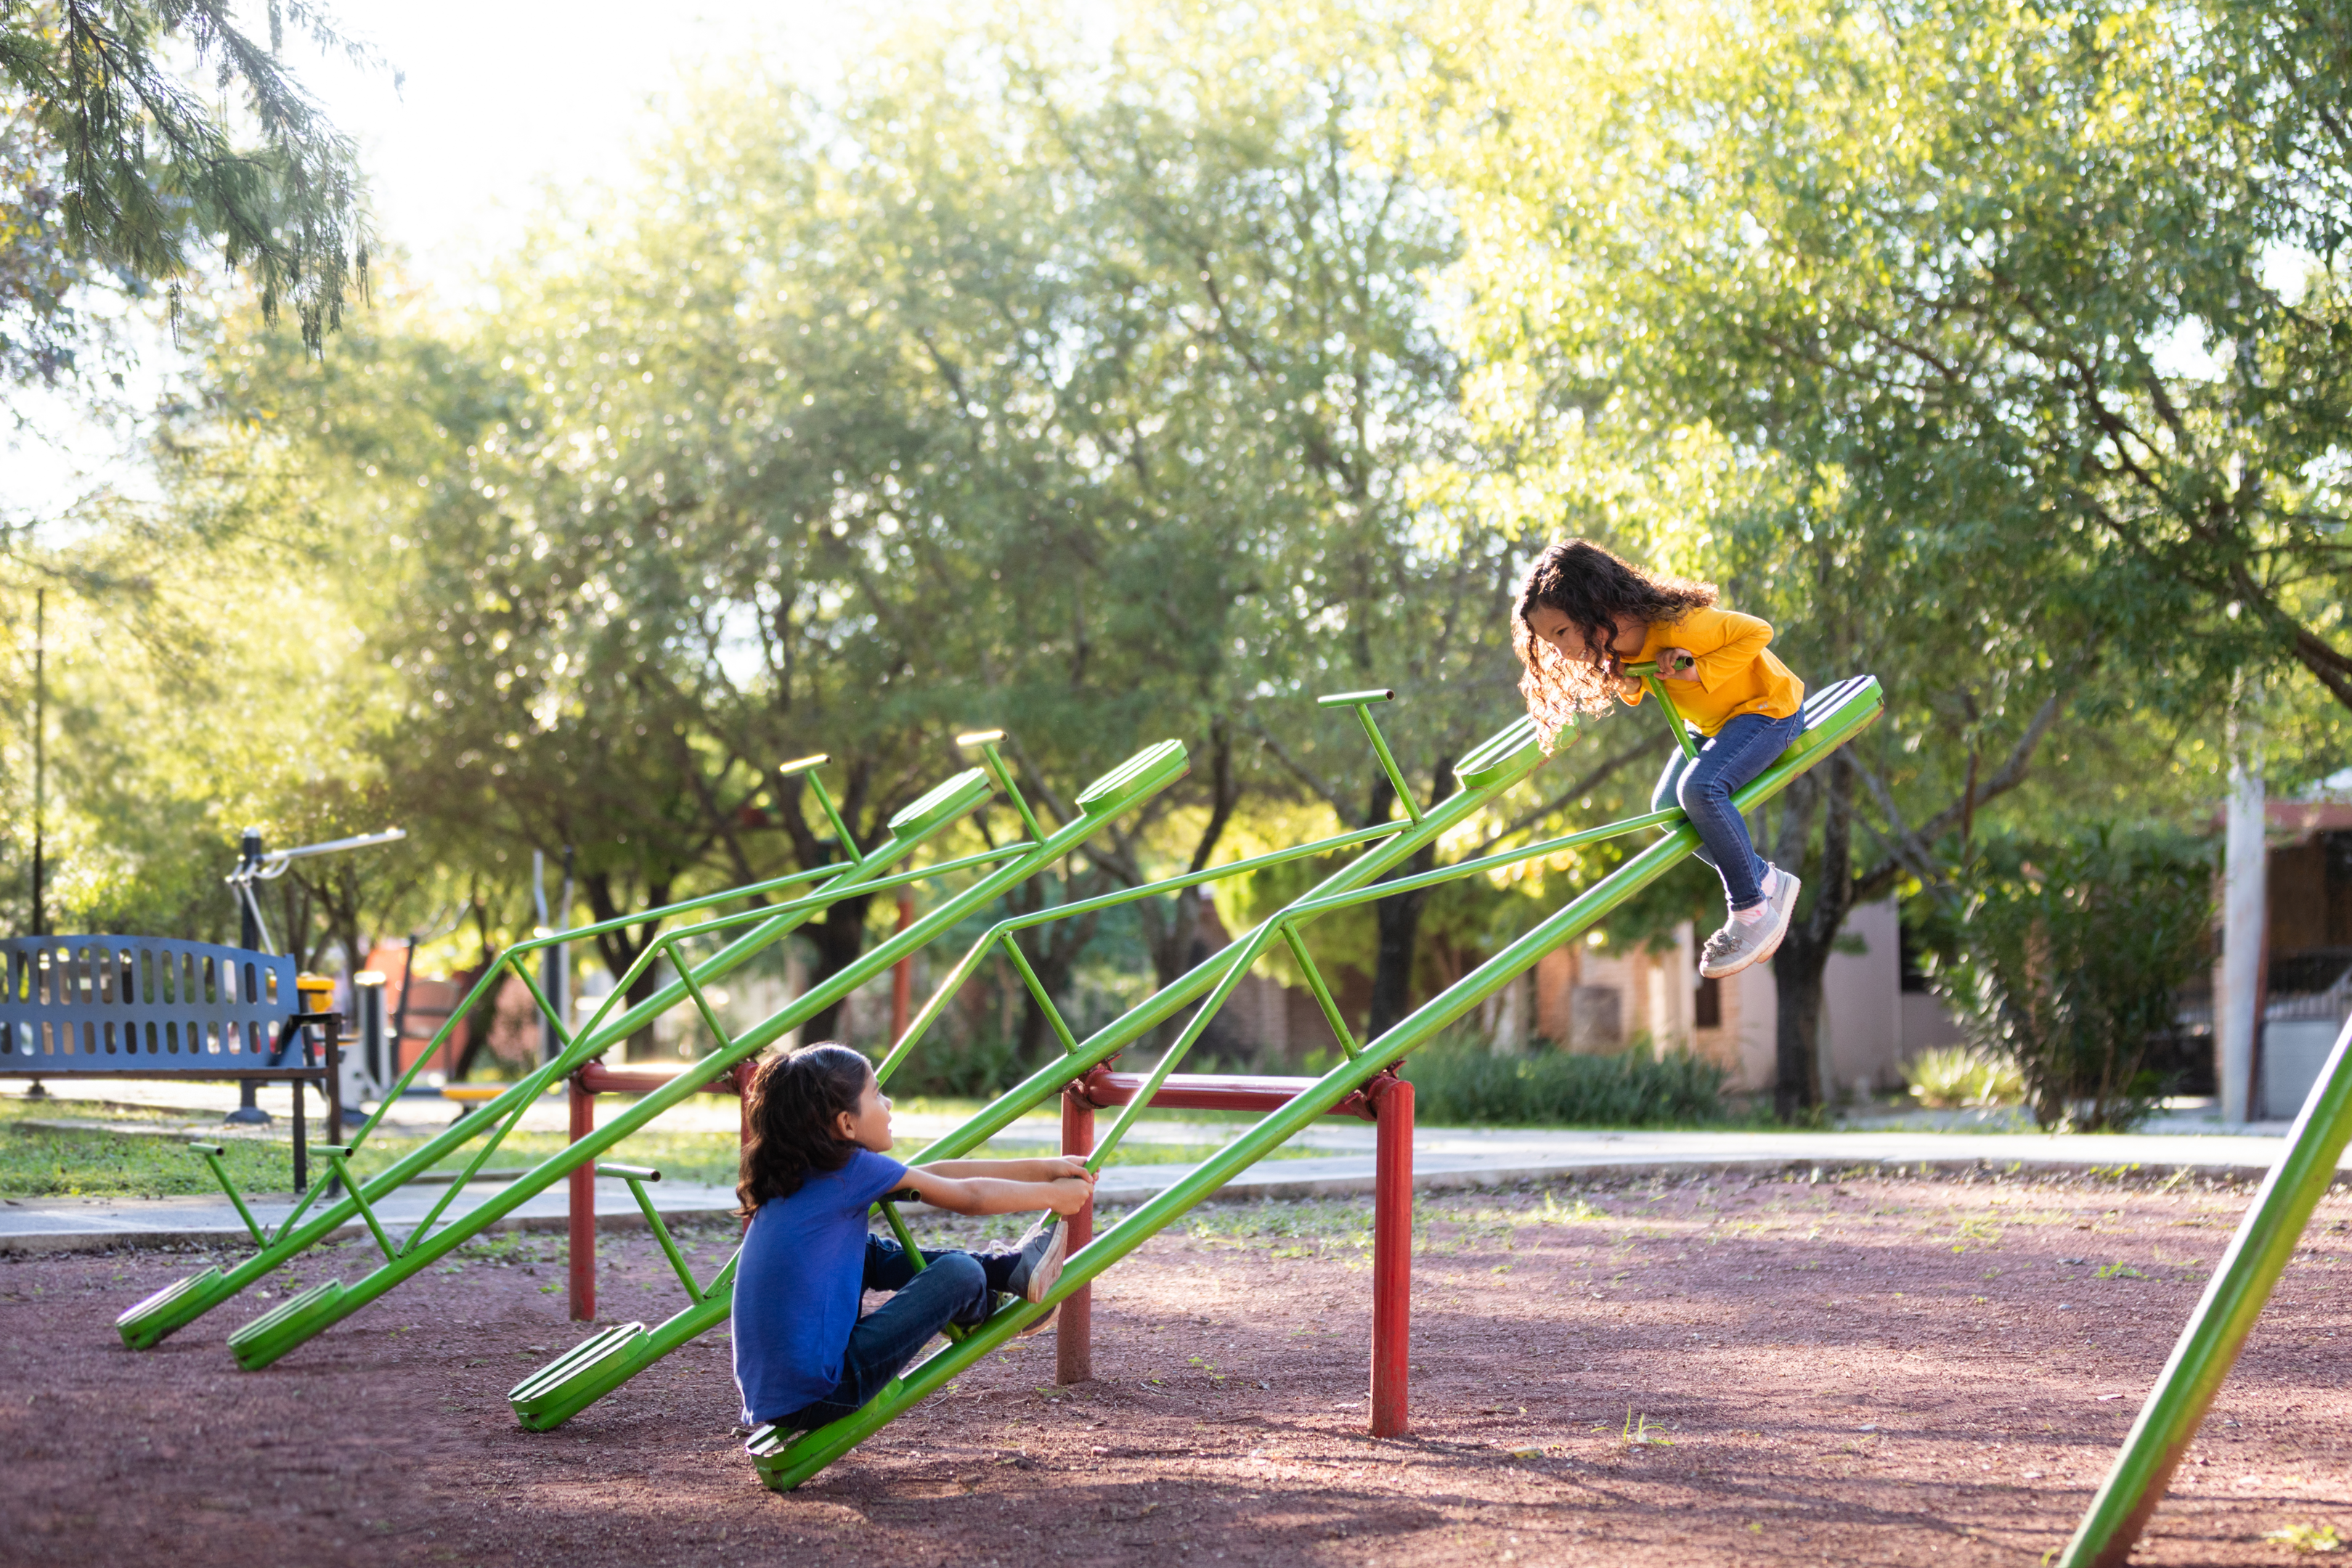 Two siblings playing on a seesaw at a park